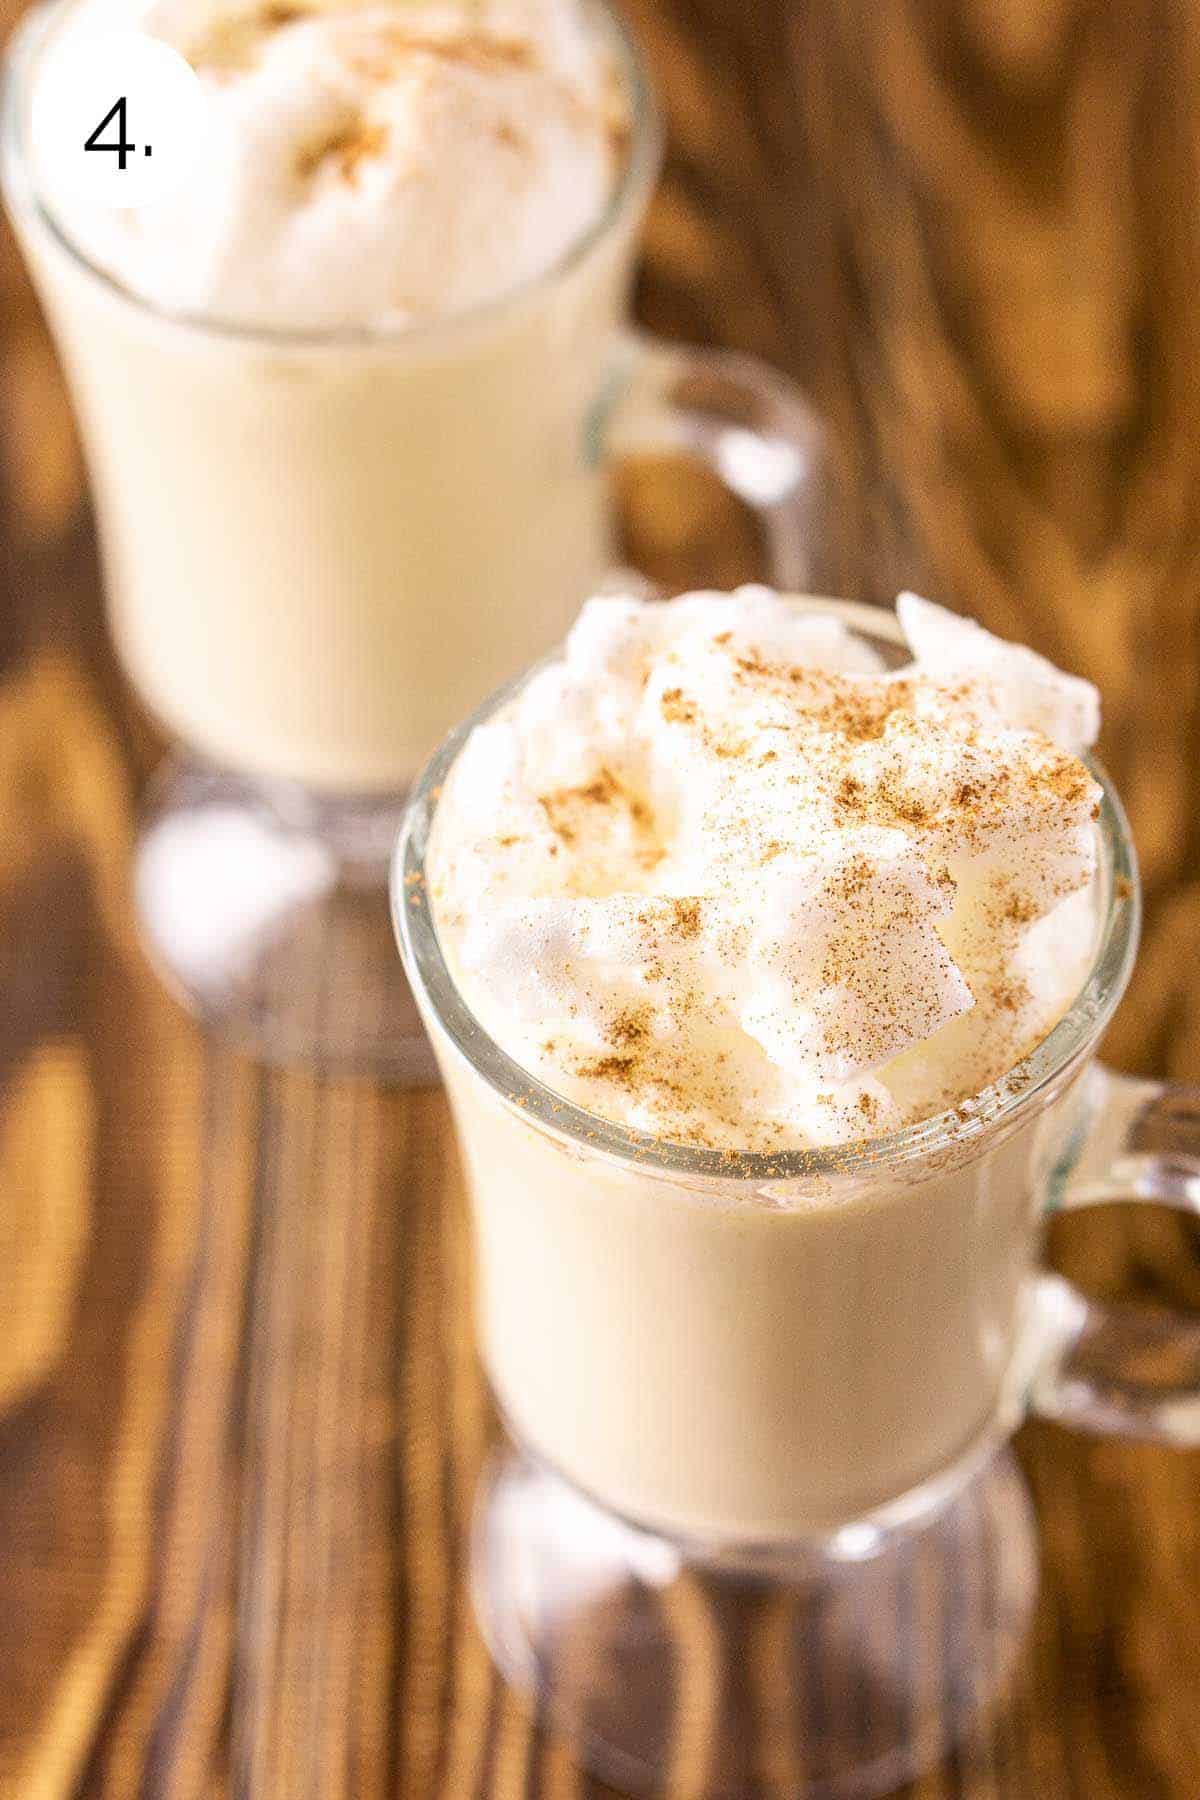 Two glasses of the bourbon eggnog with an egg white topping covered in a dusting of ground cinnamon and nutmeg.